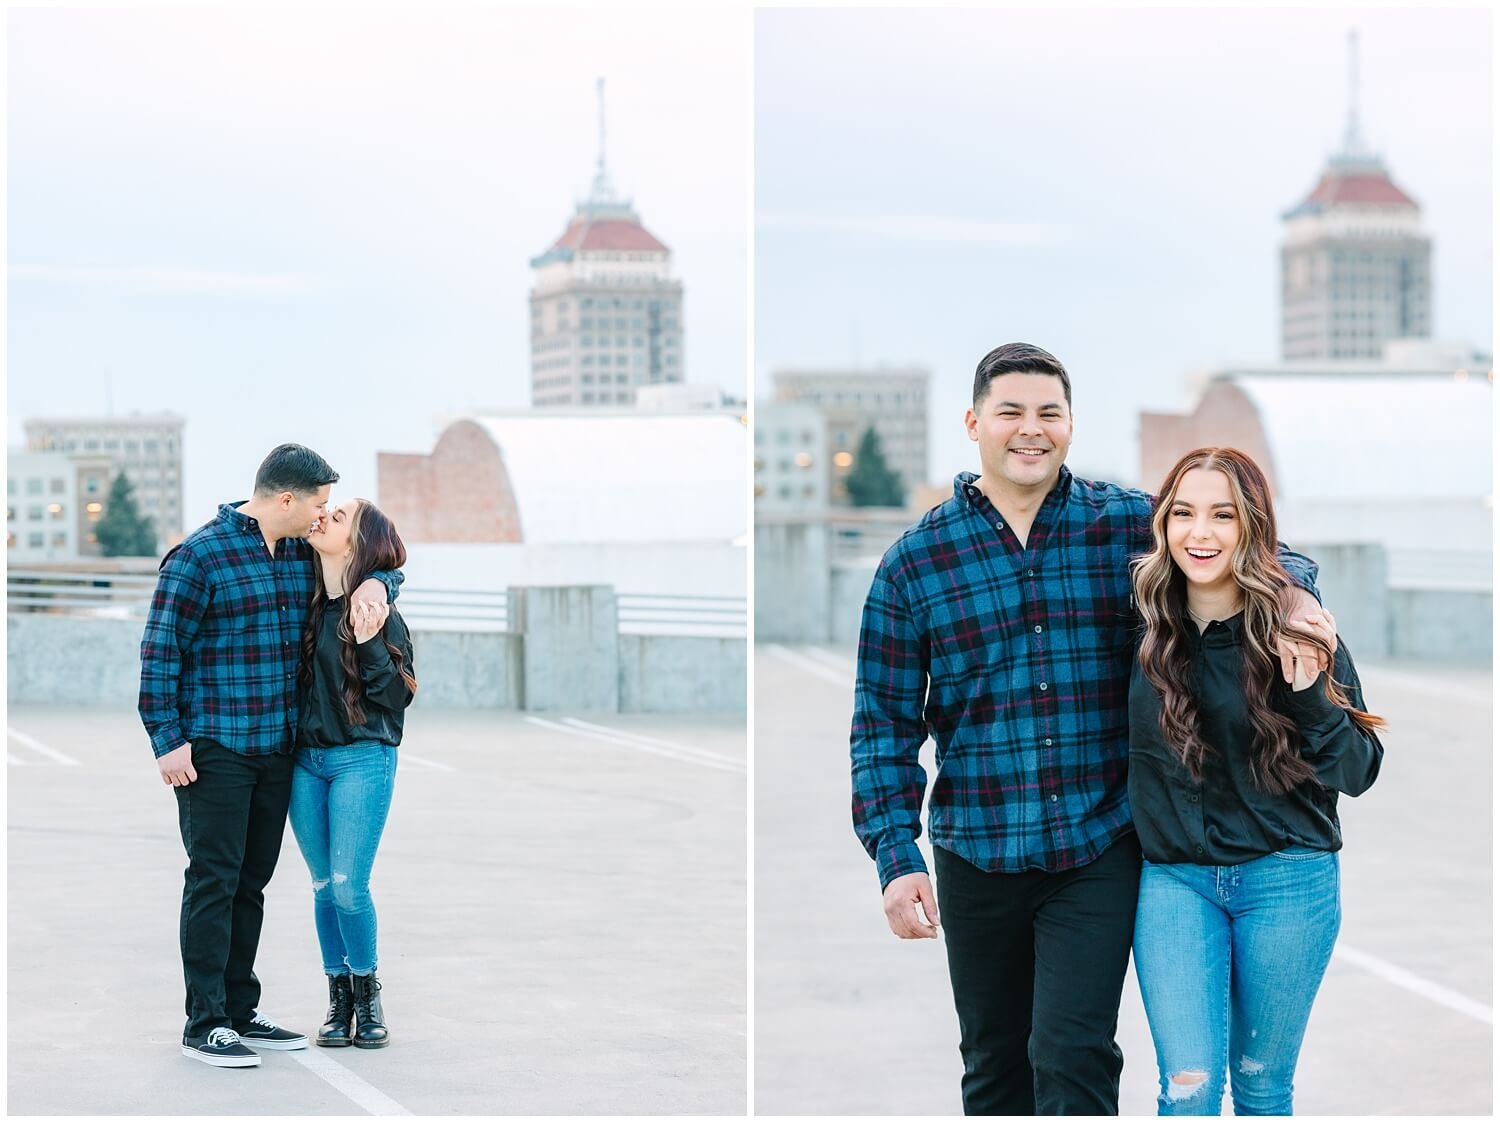 Couple smiling on rooftop - image by GunnShot Photography